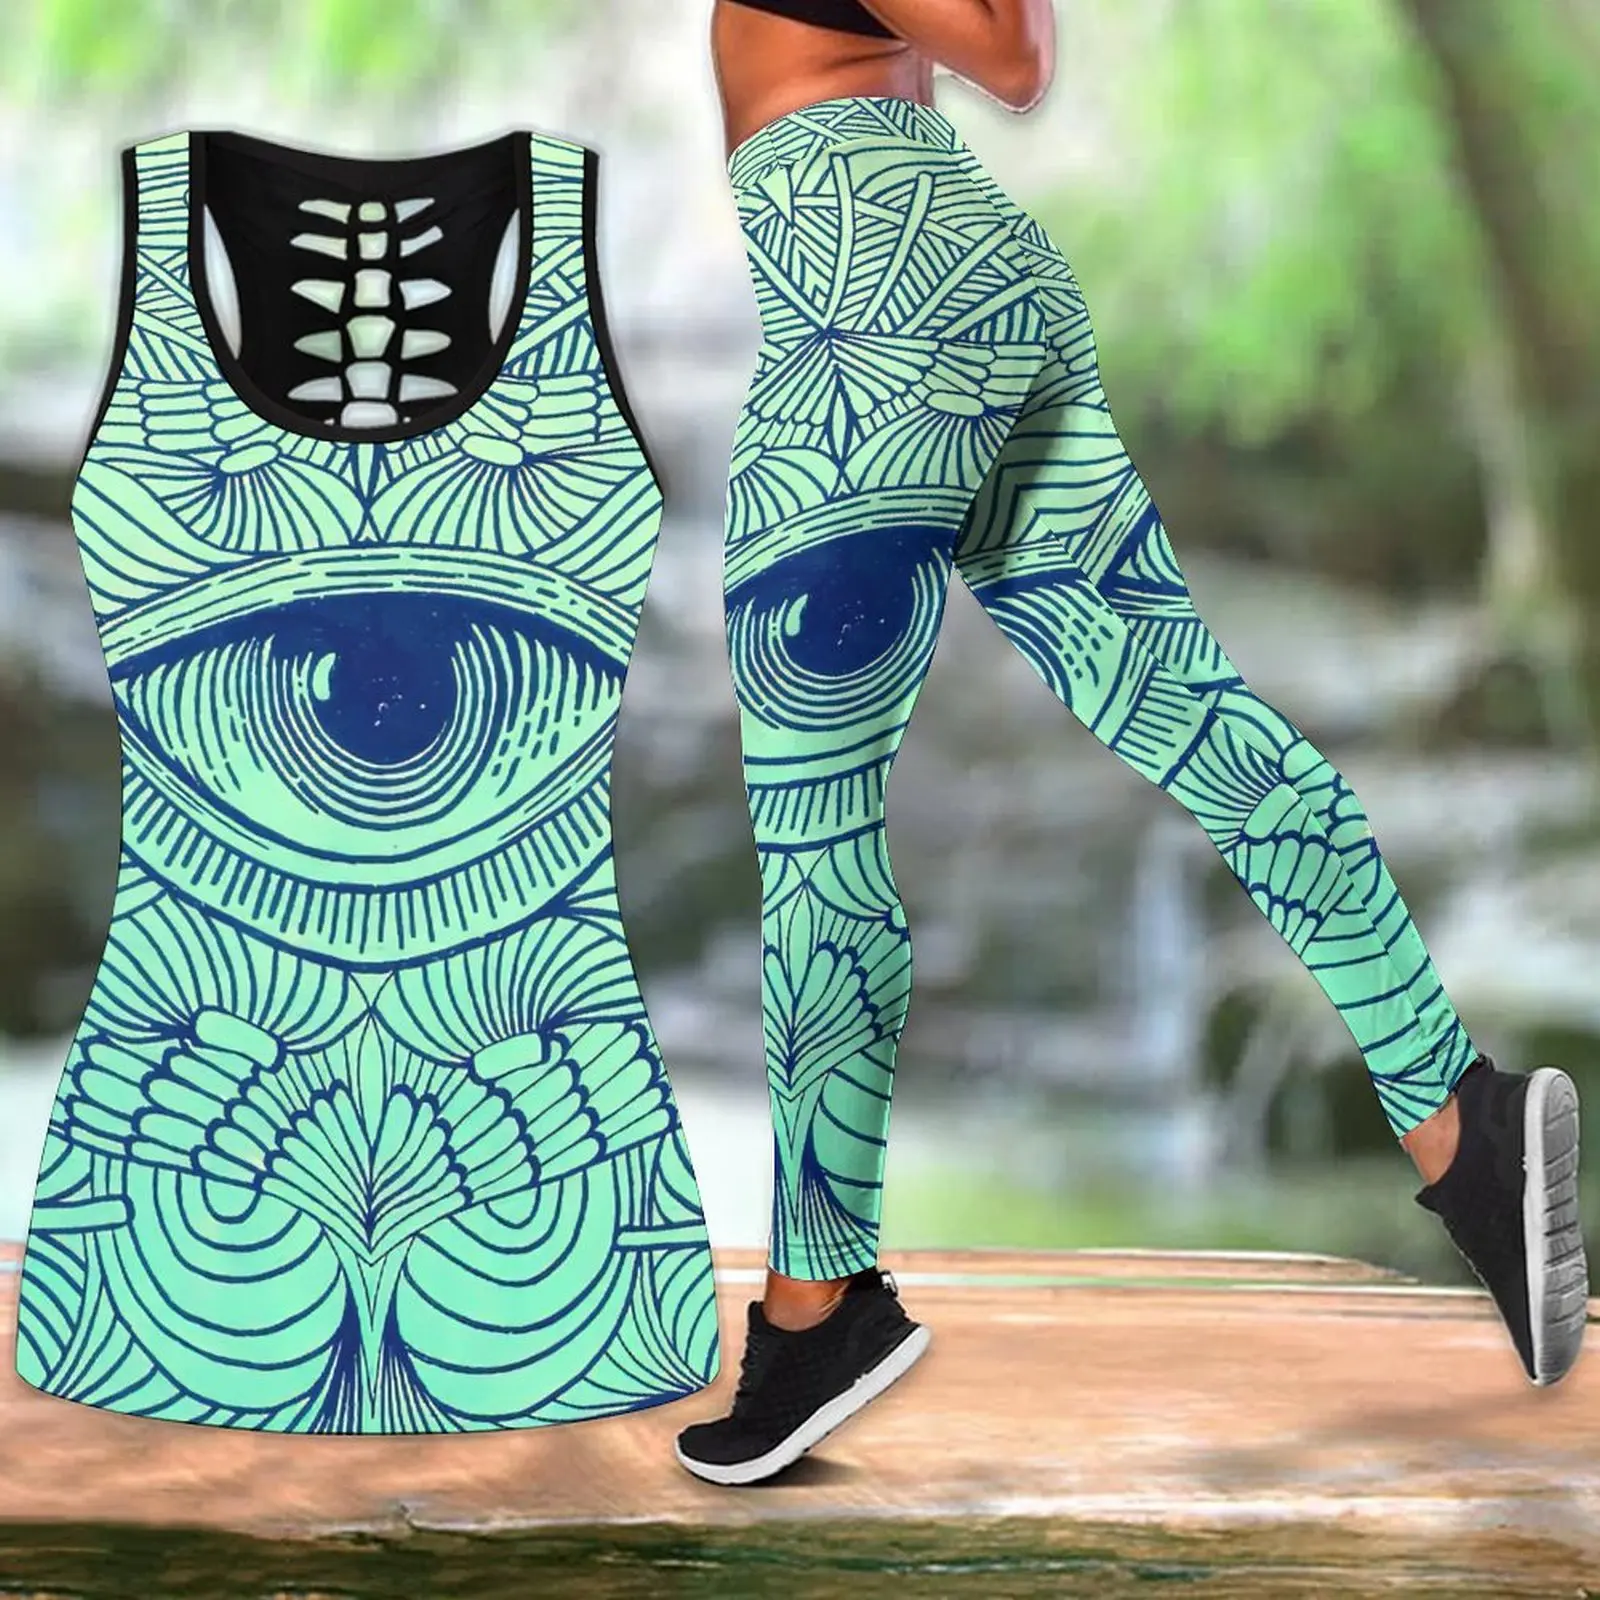 Women's Summer New Eye Graphic Print Yoga Outfit Hollow Out Tank Top Leggings Yoga Suit Tops Vest Women Clothing